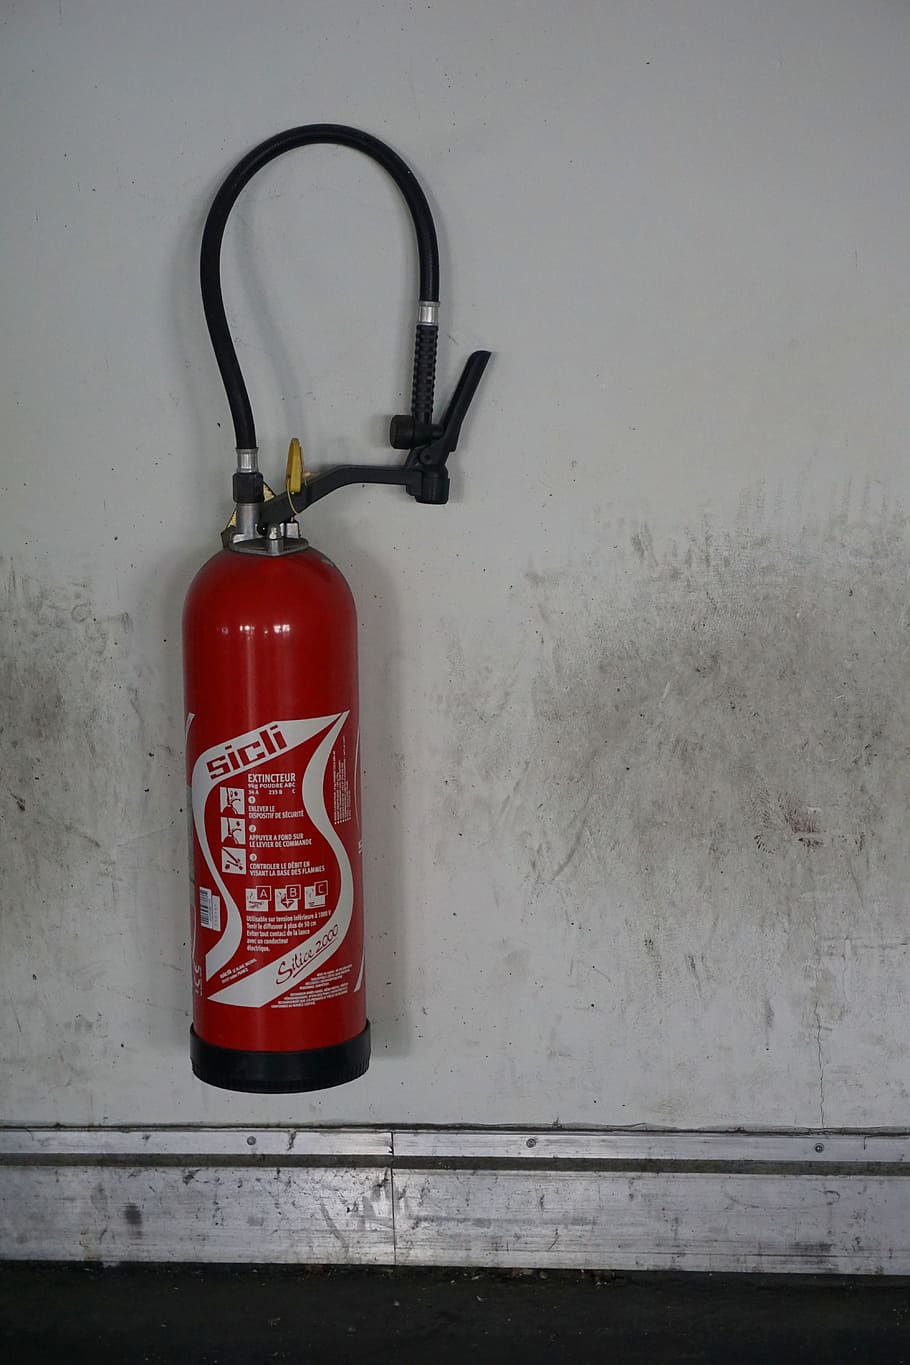 Fire, Fire, Fire Extinguisher, fire, red, fire safety, security, firefighter, flame, no People, safety